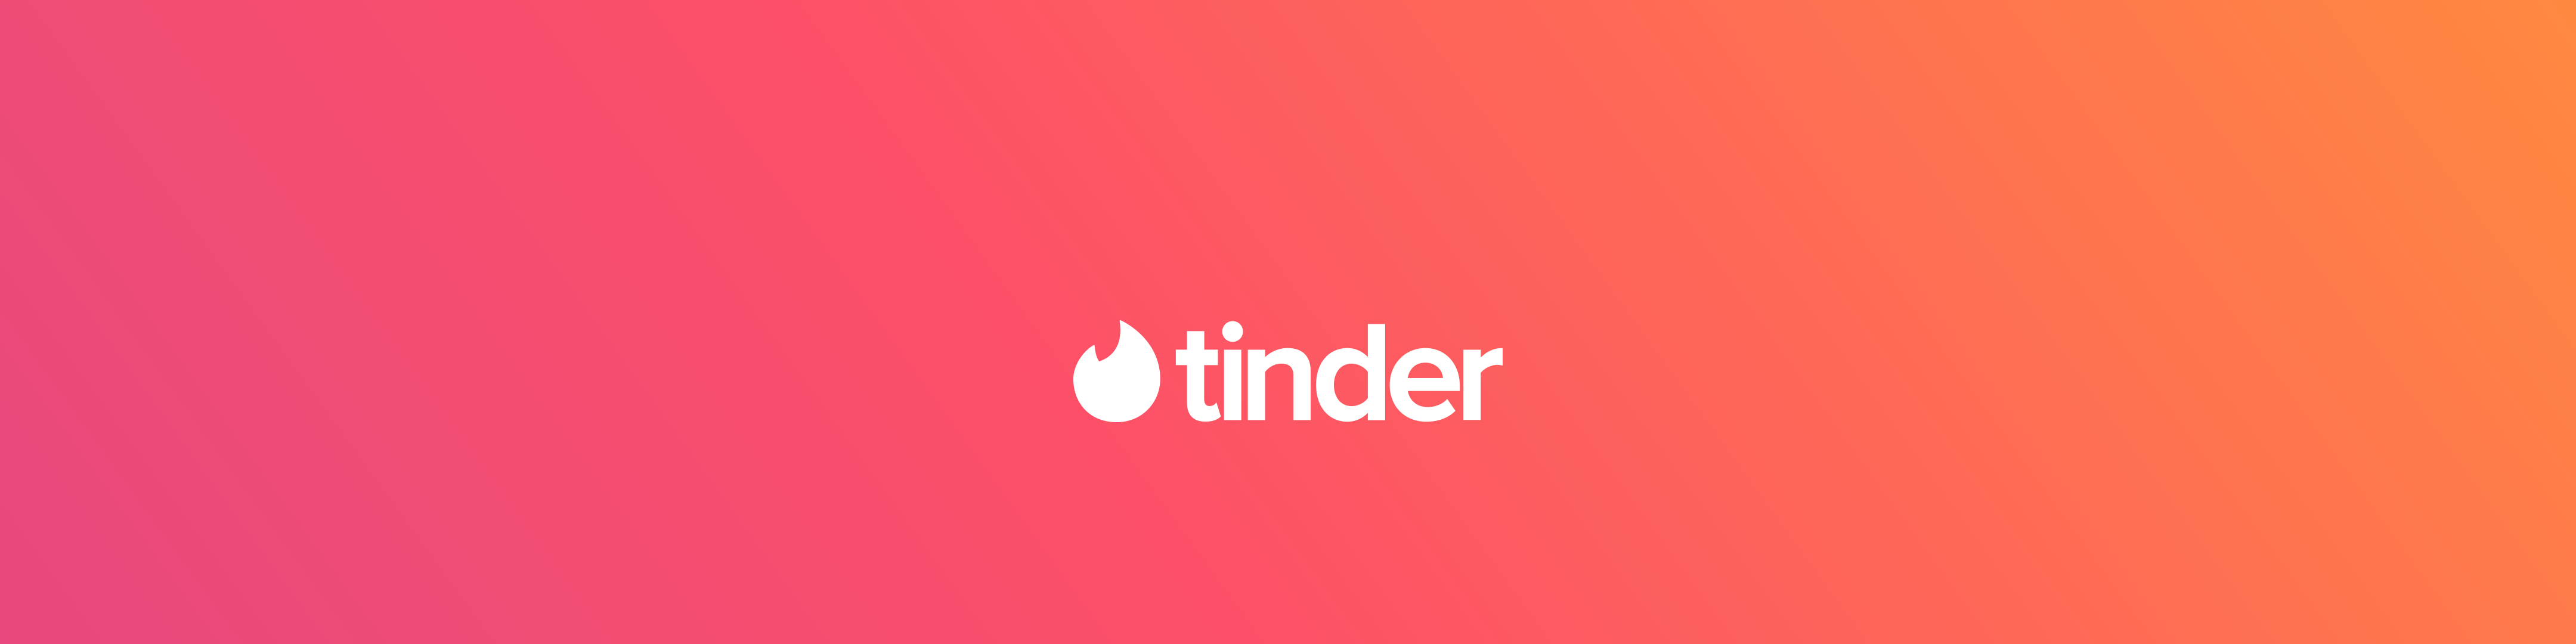 Tinder Overview Apple App Store United Arab Emirates - the reason why roblox got banned in uae united arab